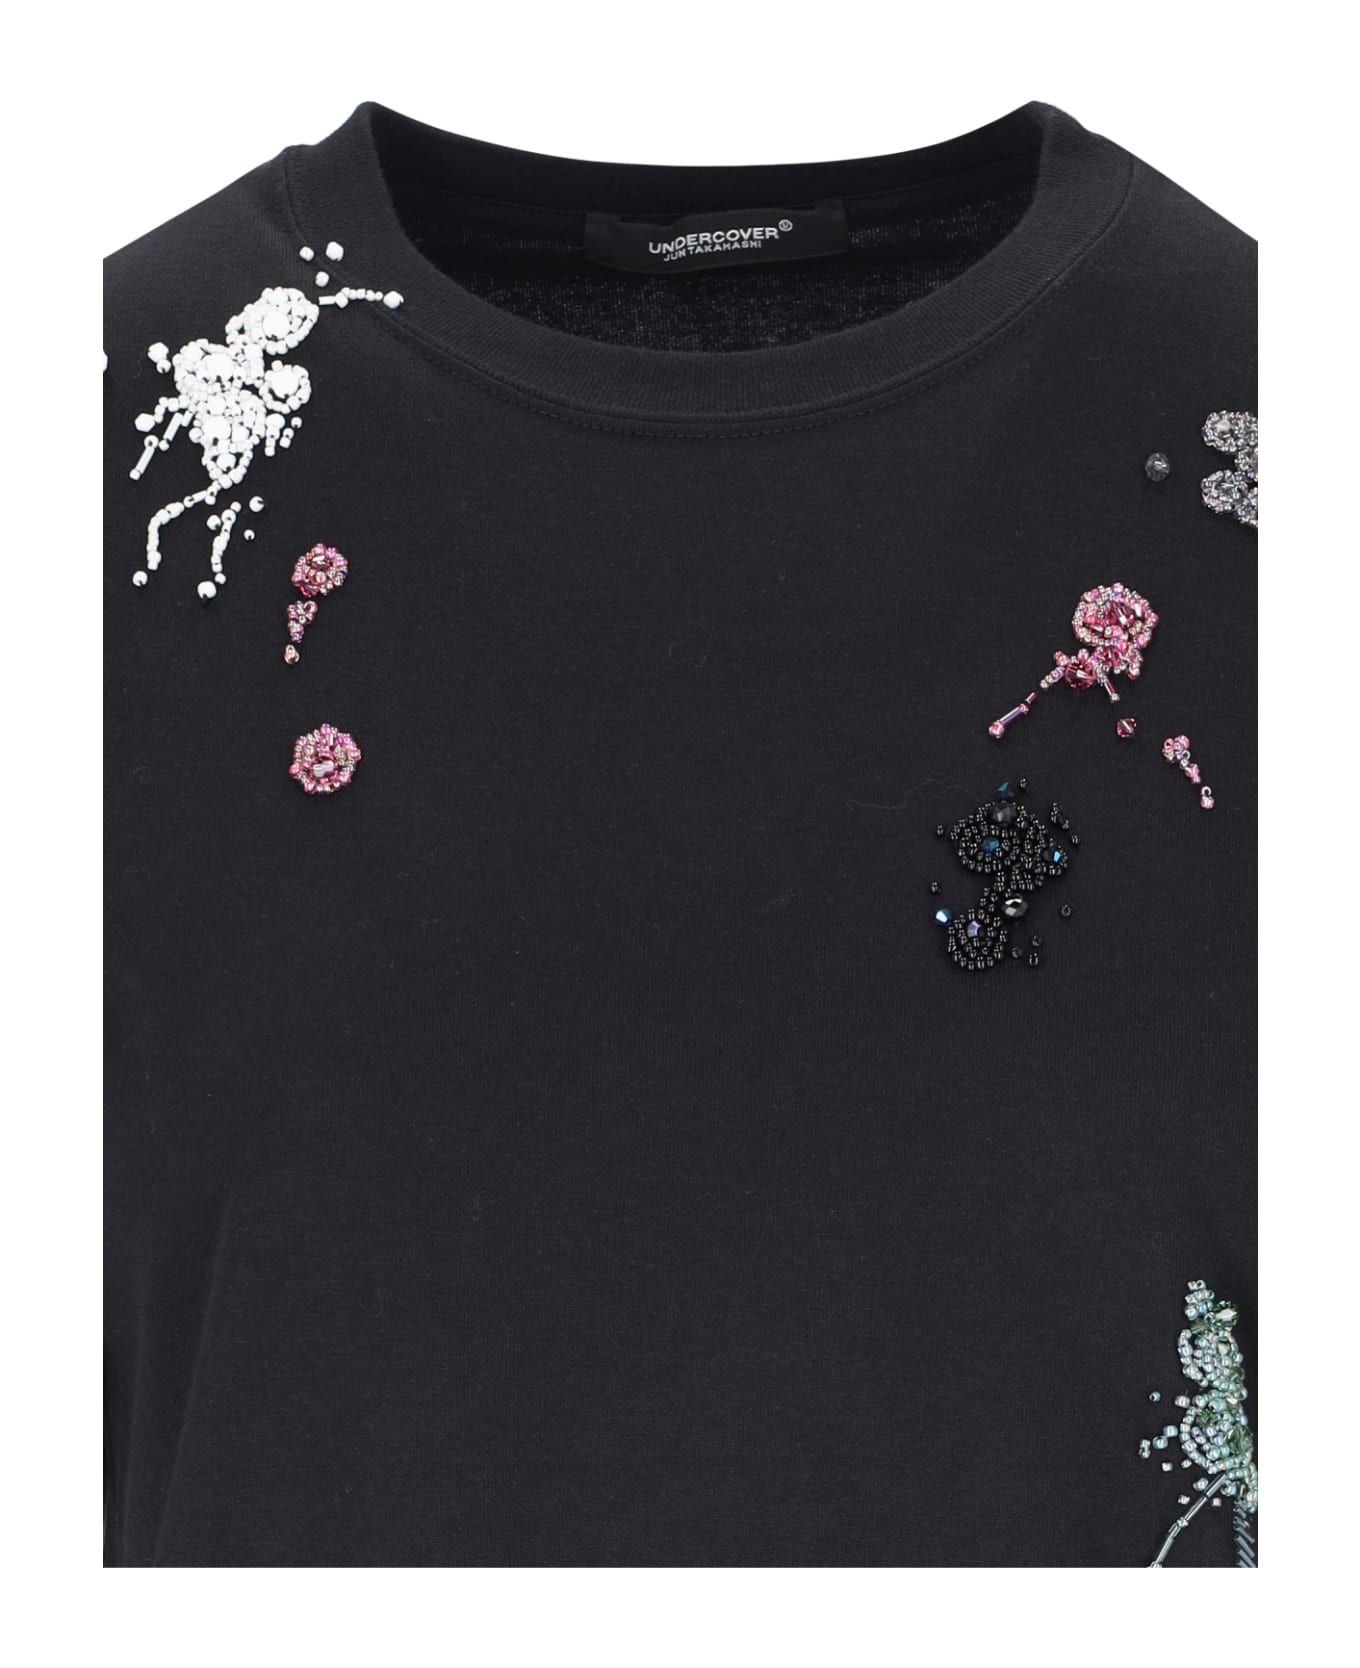 Undercover Jun Takahashi Embroidery Detail T-shirt - Black   Tシャツ